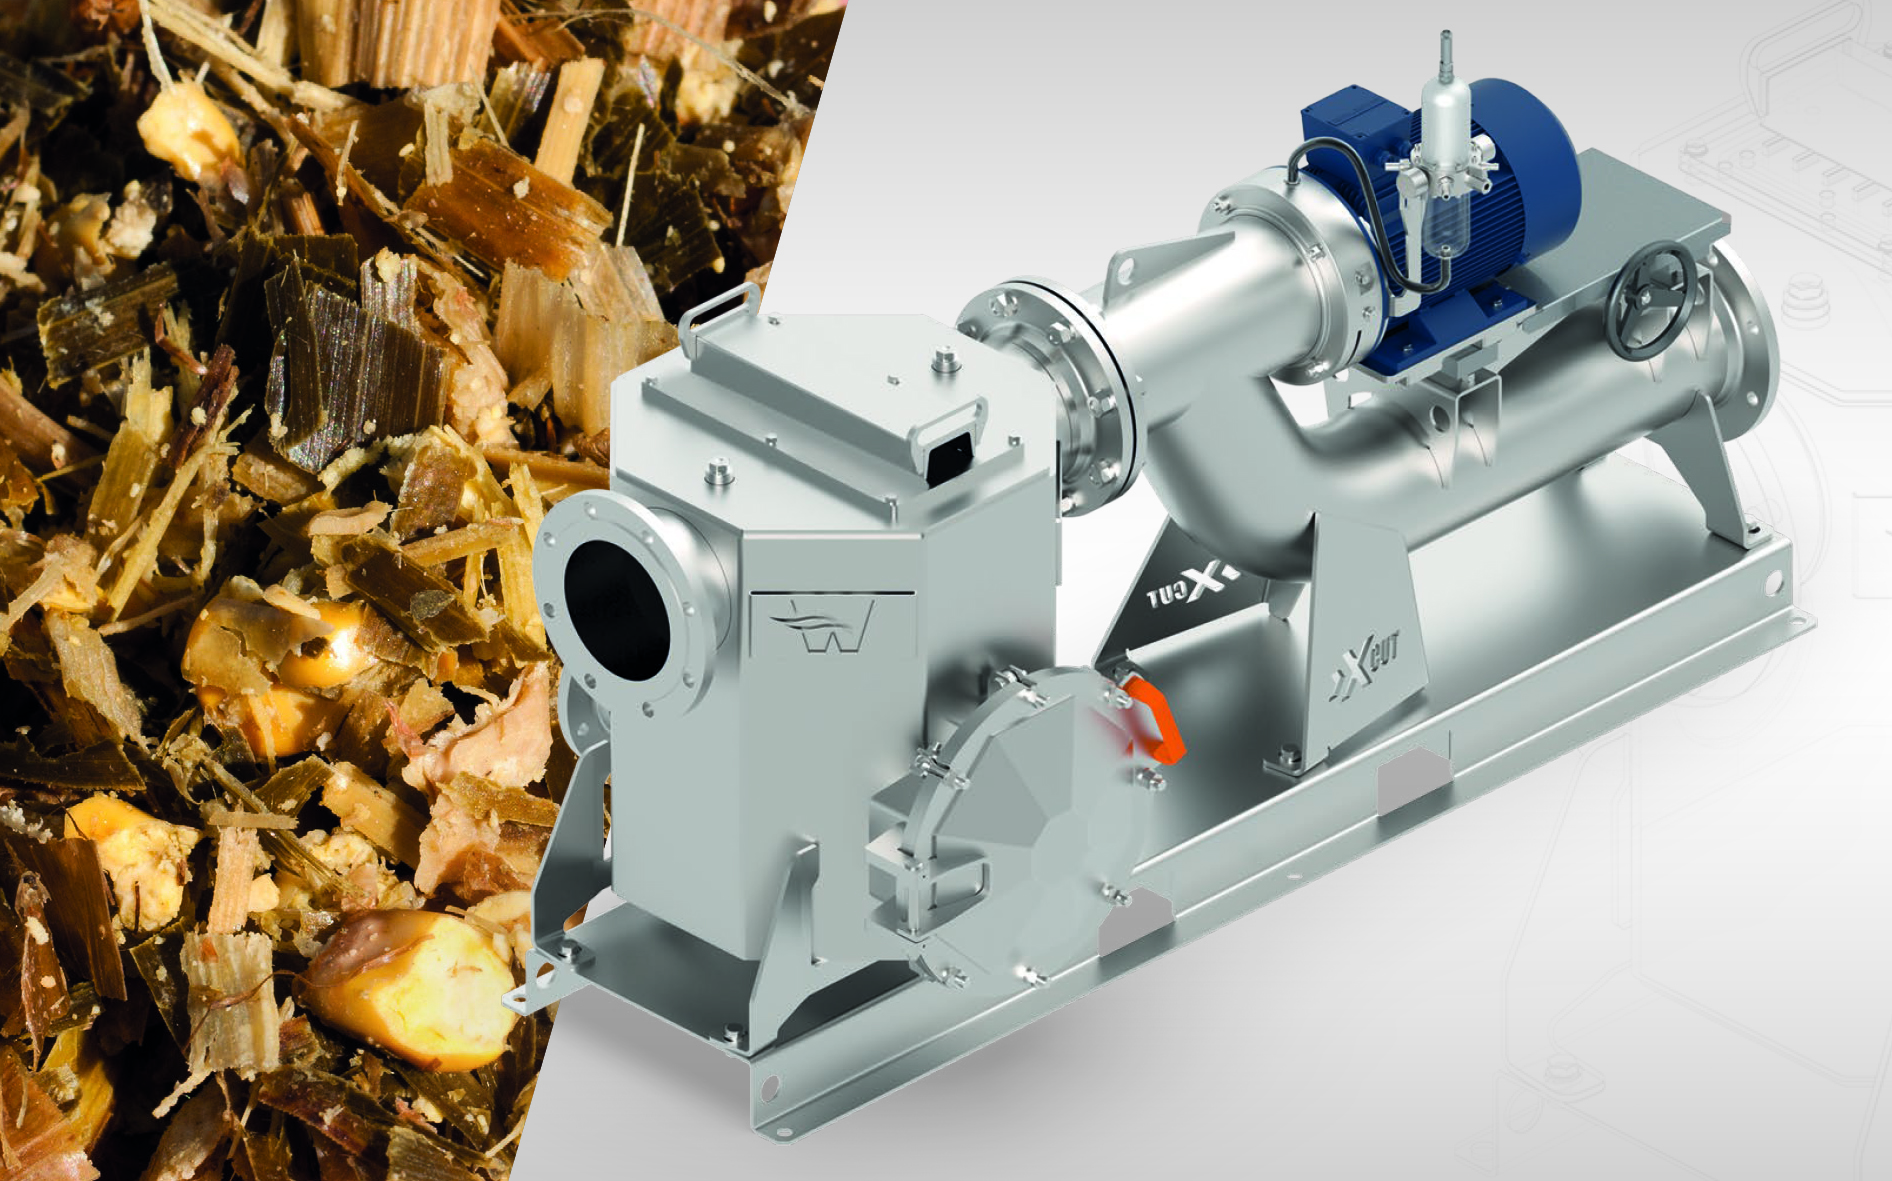 Wangen’s new modular X-UNIT system is designed for the separation and crushing of foreign bodies.